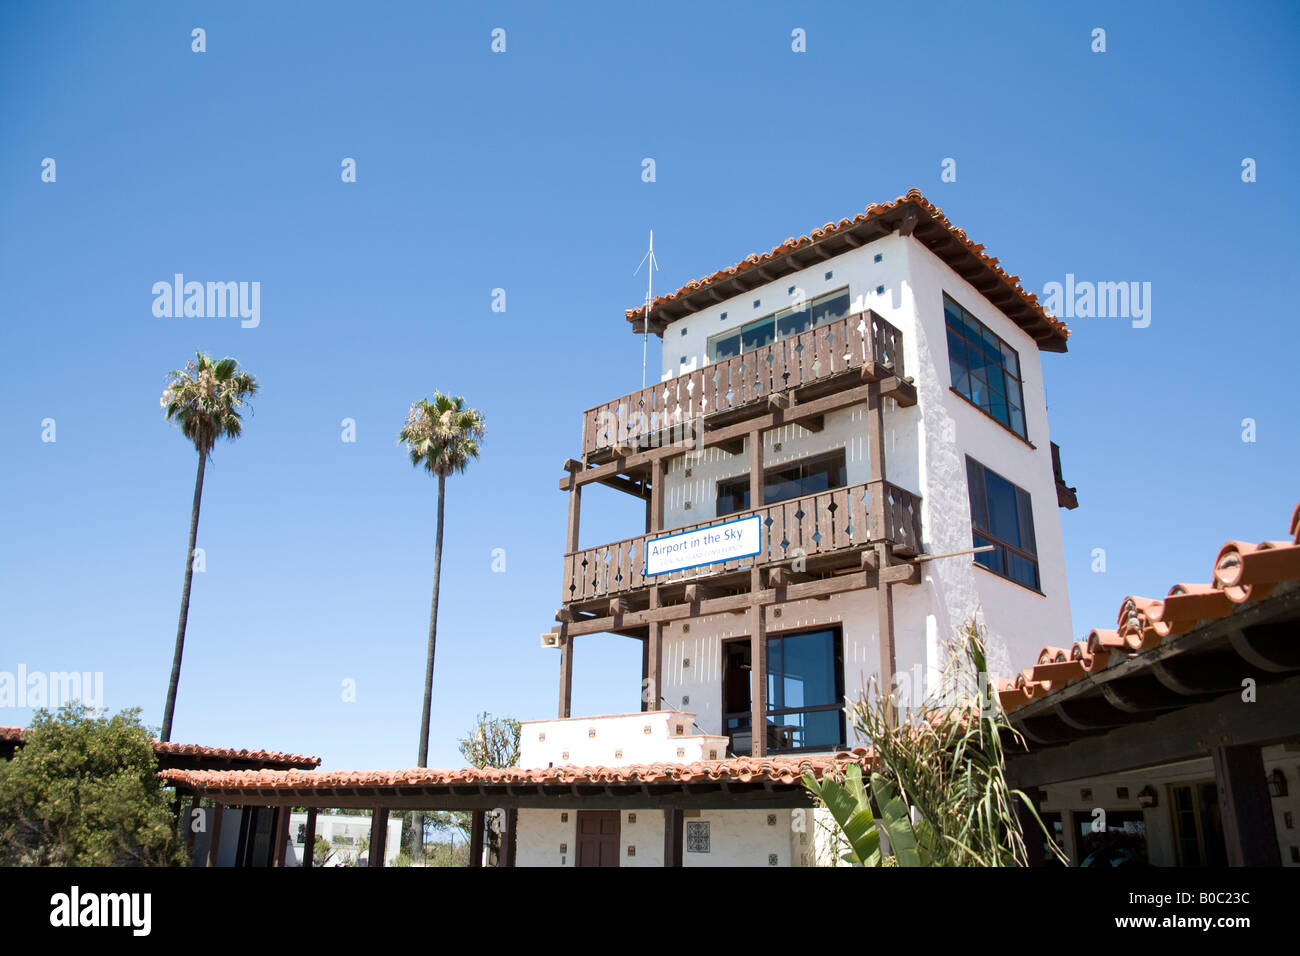 Catalina airport Control Tower; Island in the Sky airport. Stock Photo